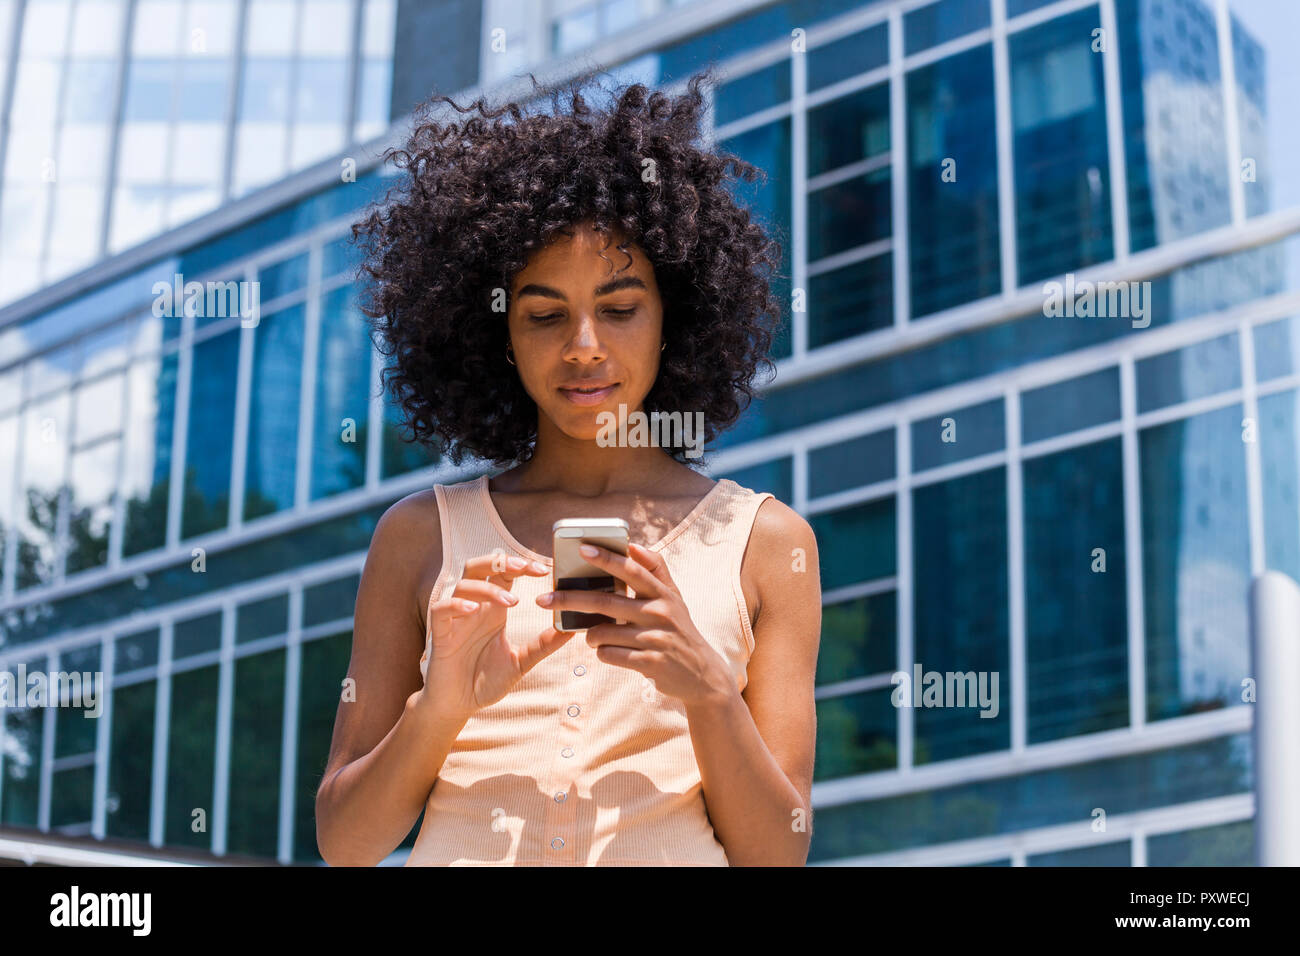 Germany, Frankfurt, portrait of young woman with curly hair using smartphone Stock Photo